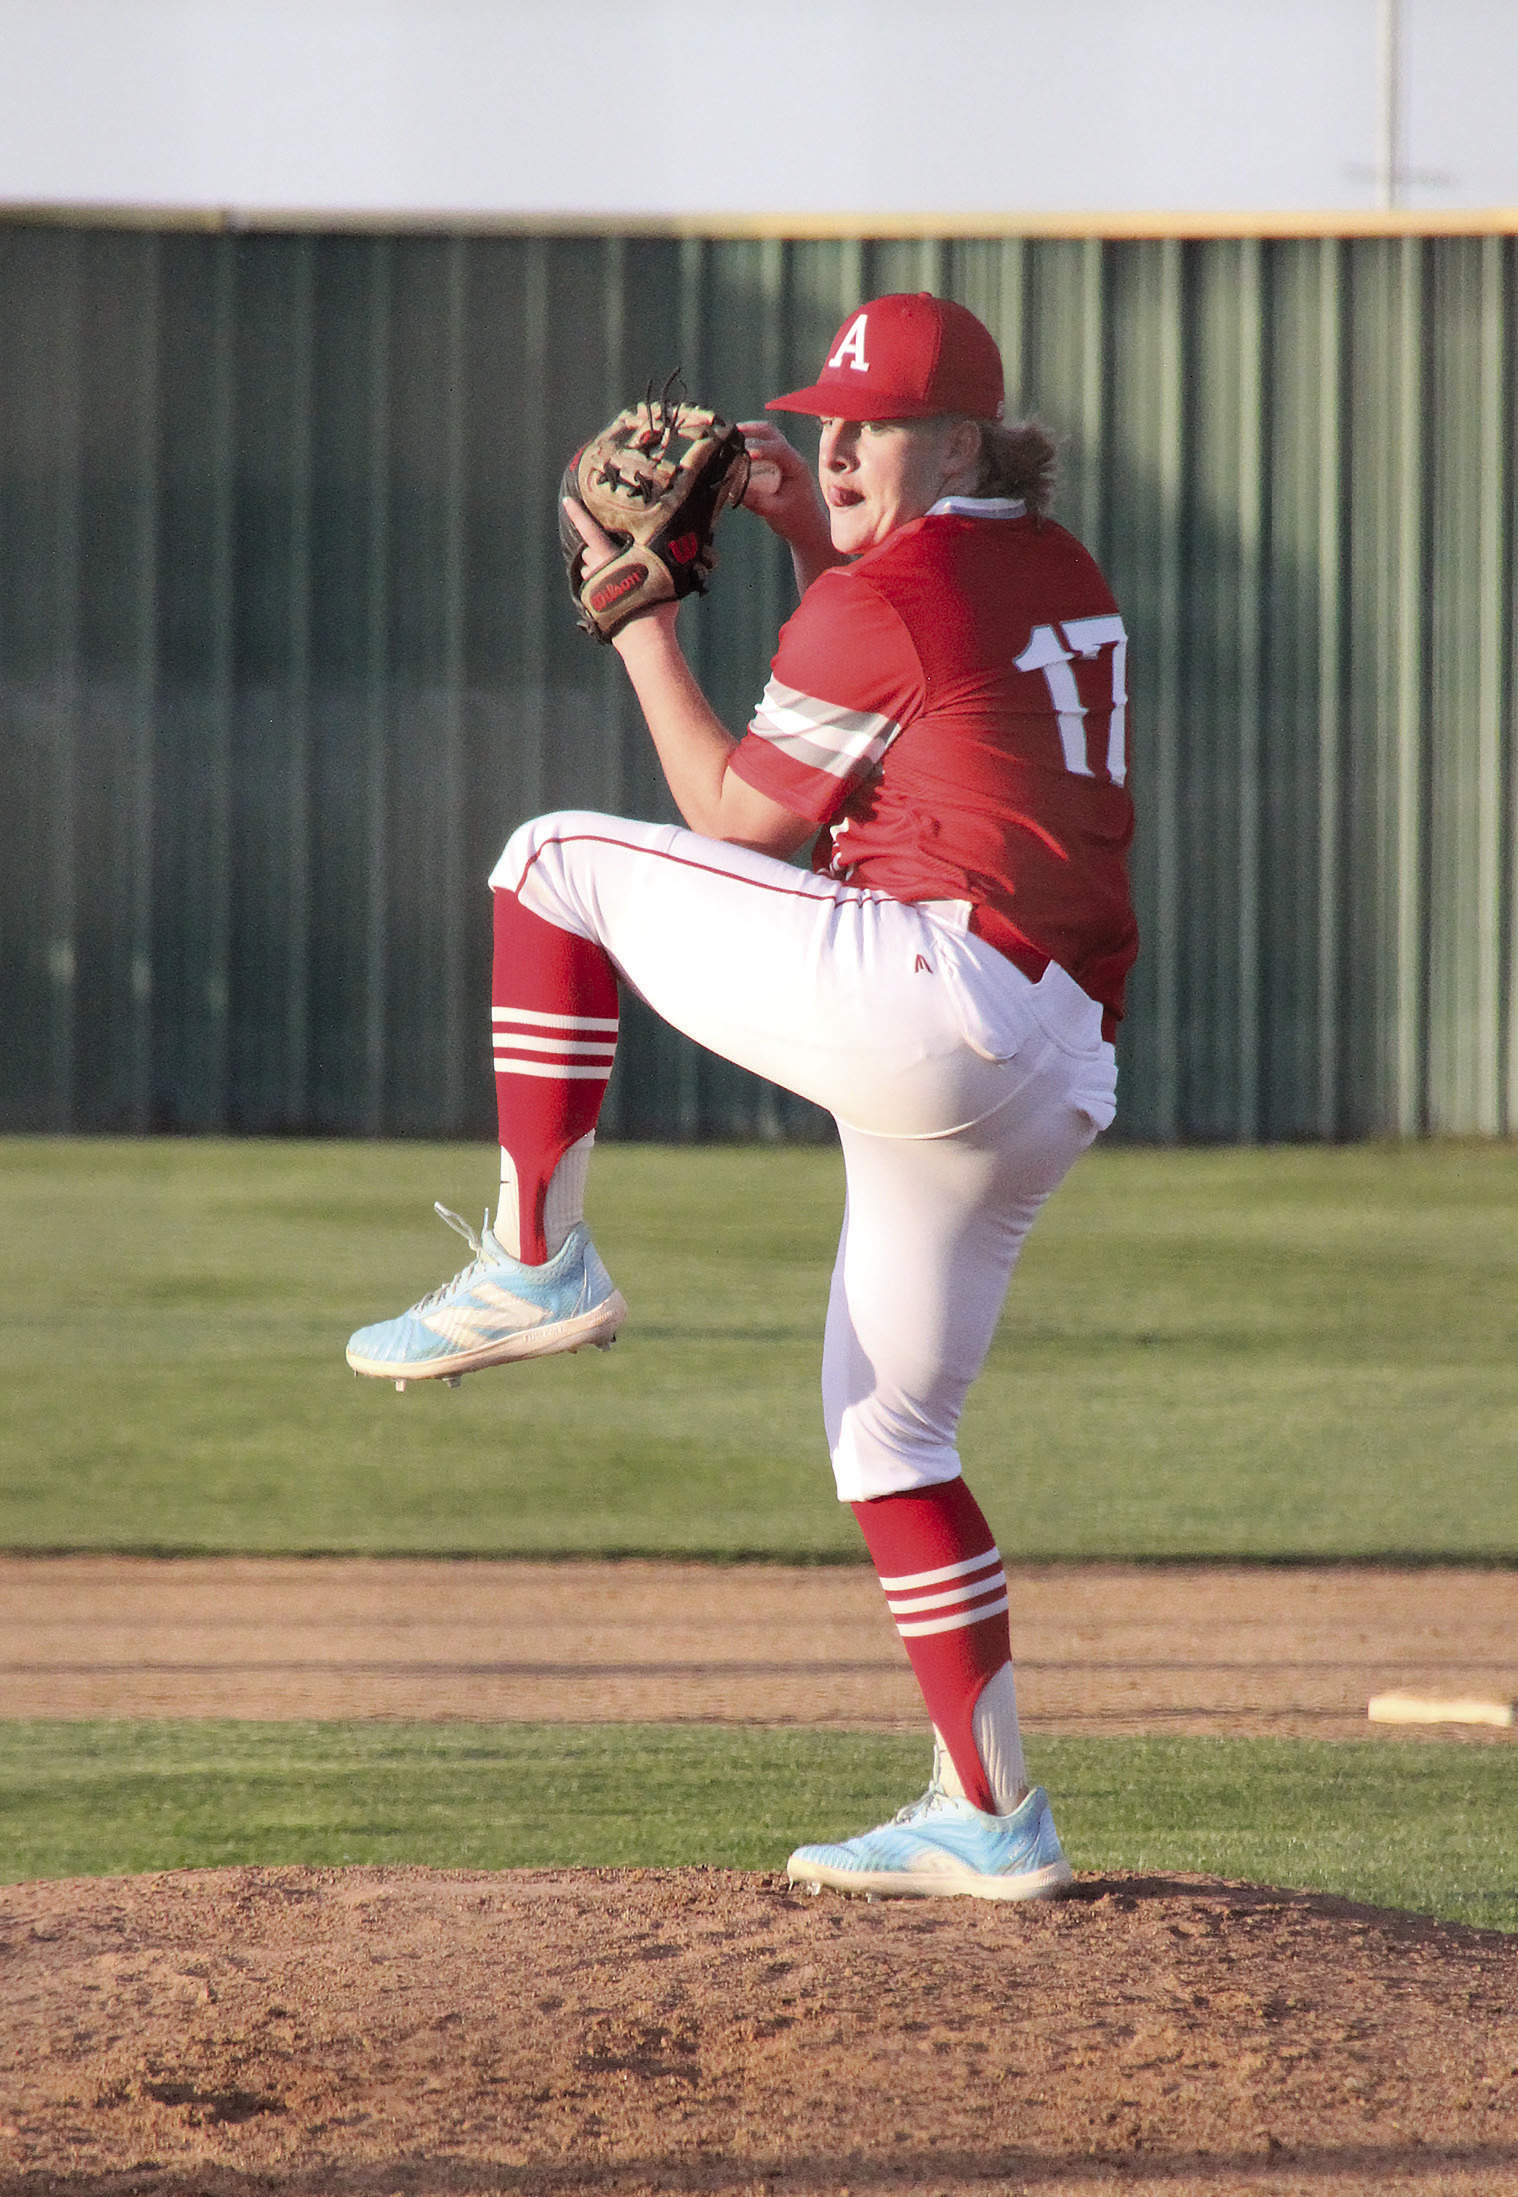 Lions lose to Hawley in district opener